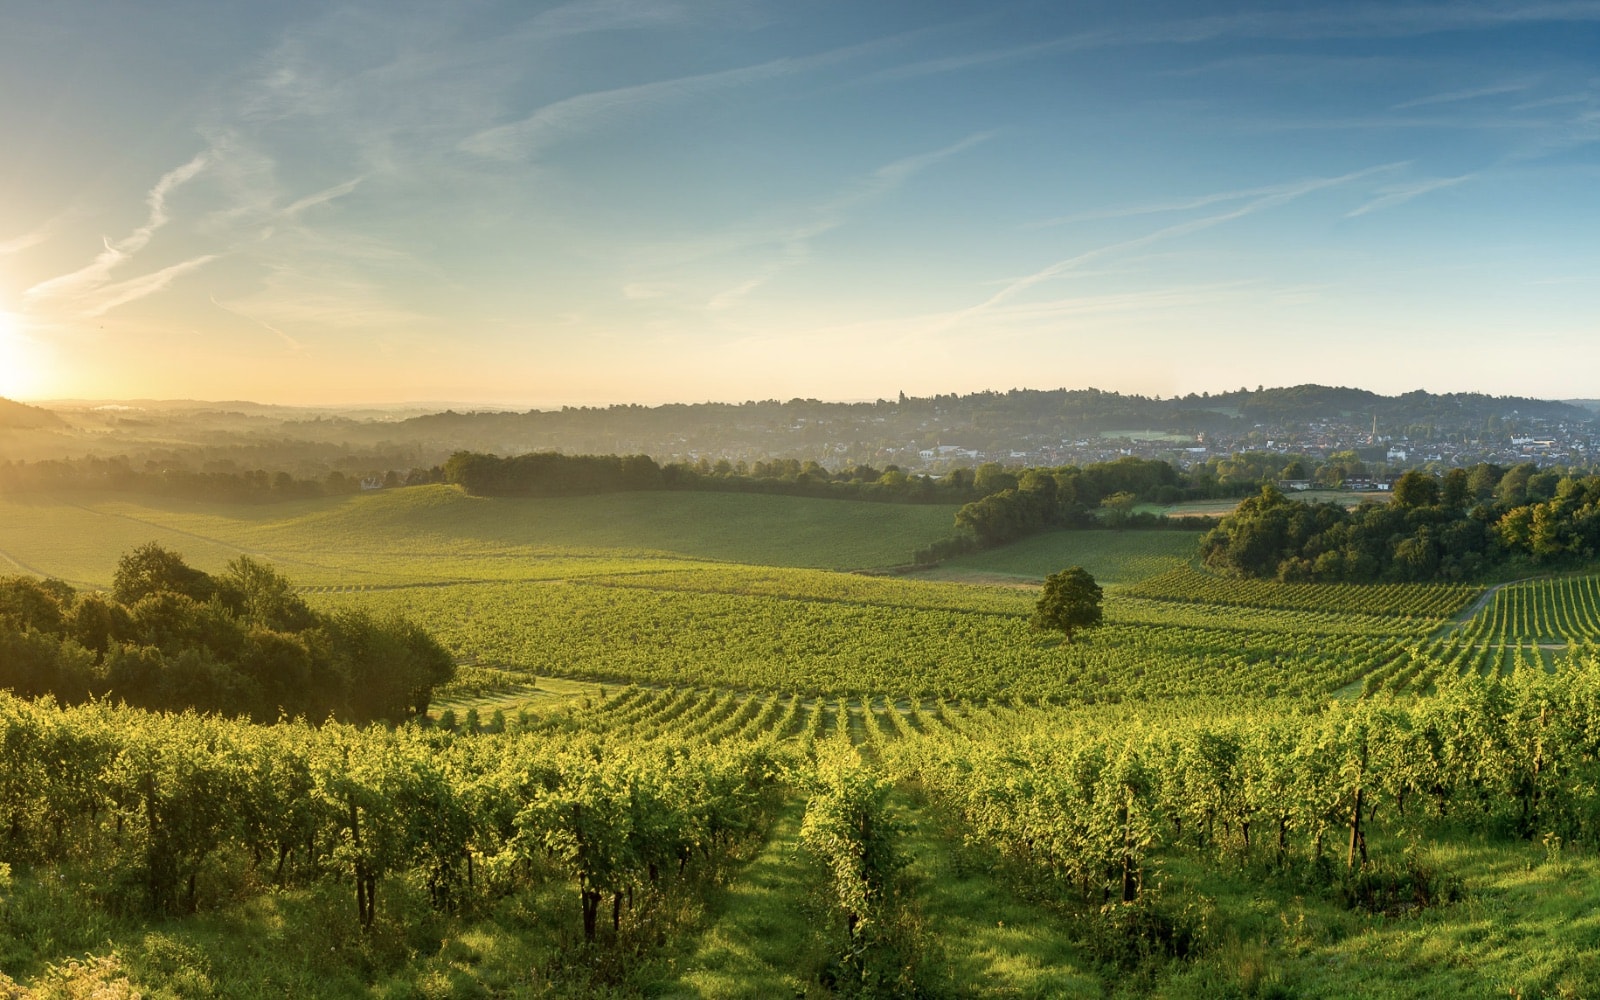 Explore the stunning vistas of the Surrey Hills area of outstanding natural beauty